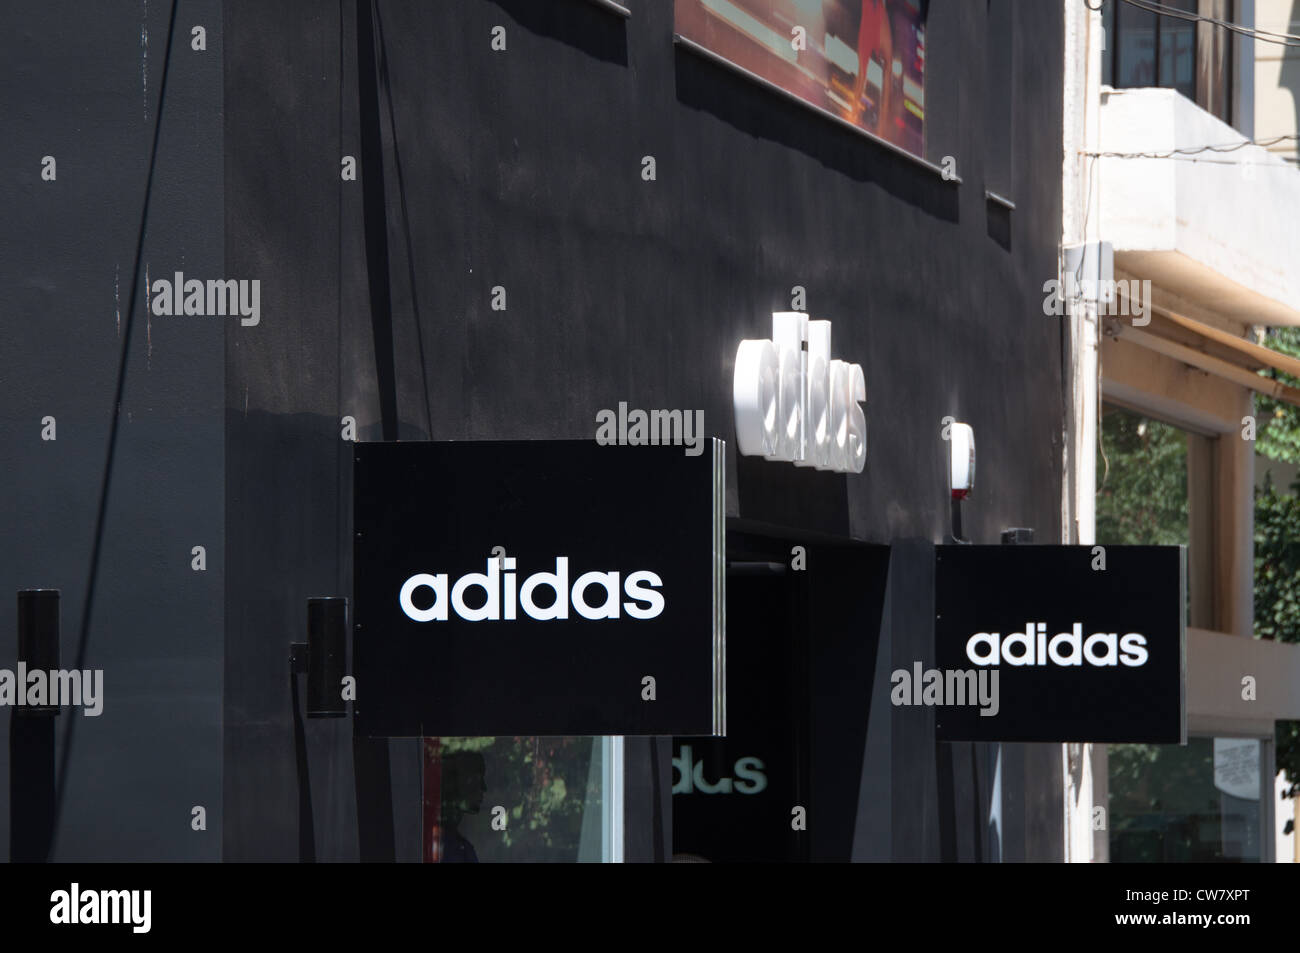 Adidas sign at a store in Heraklion, the capital of the island Crete in  Greece on August 6,2012 Stock Photo - Alamy